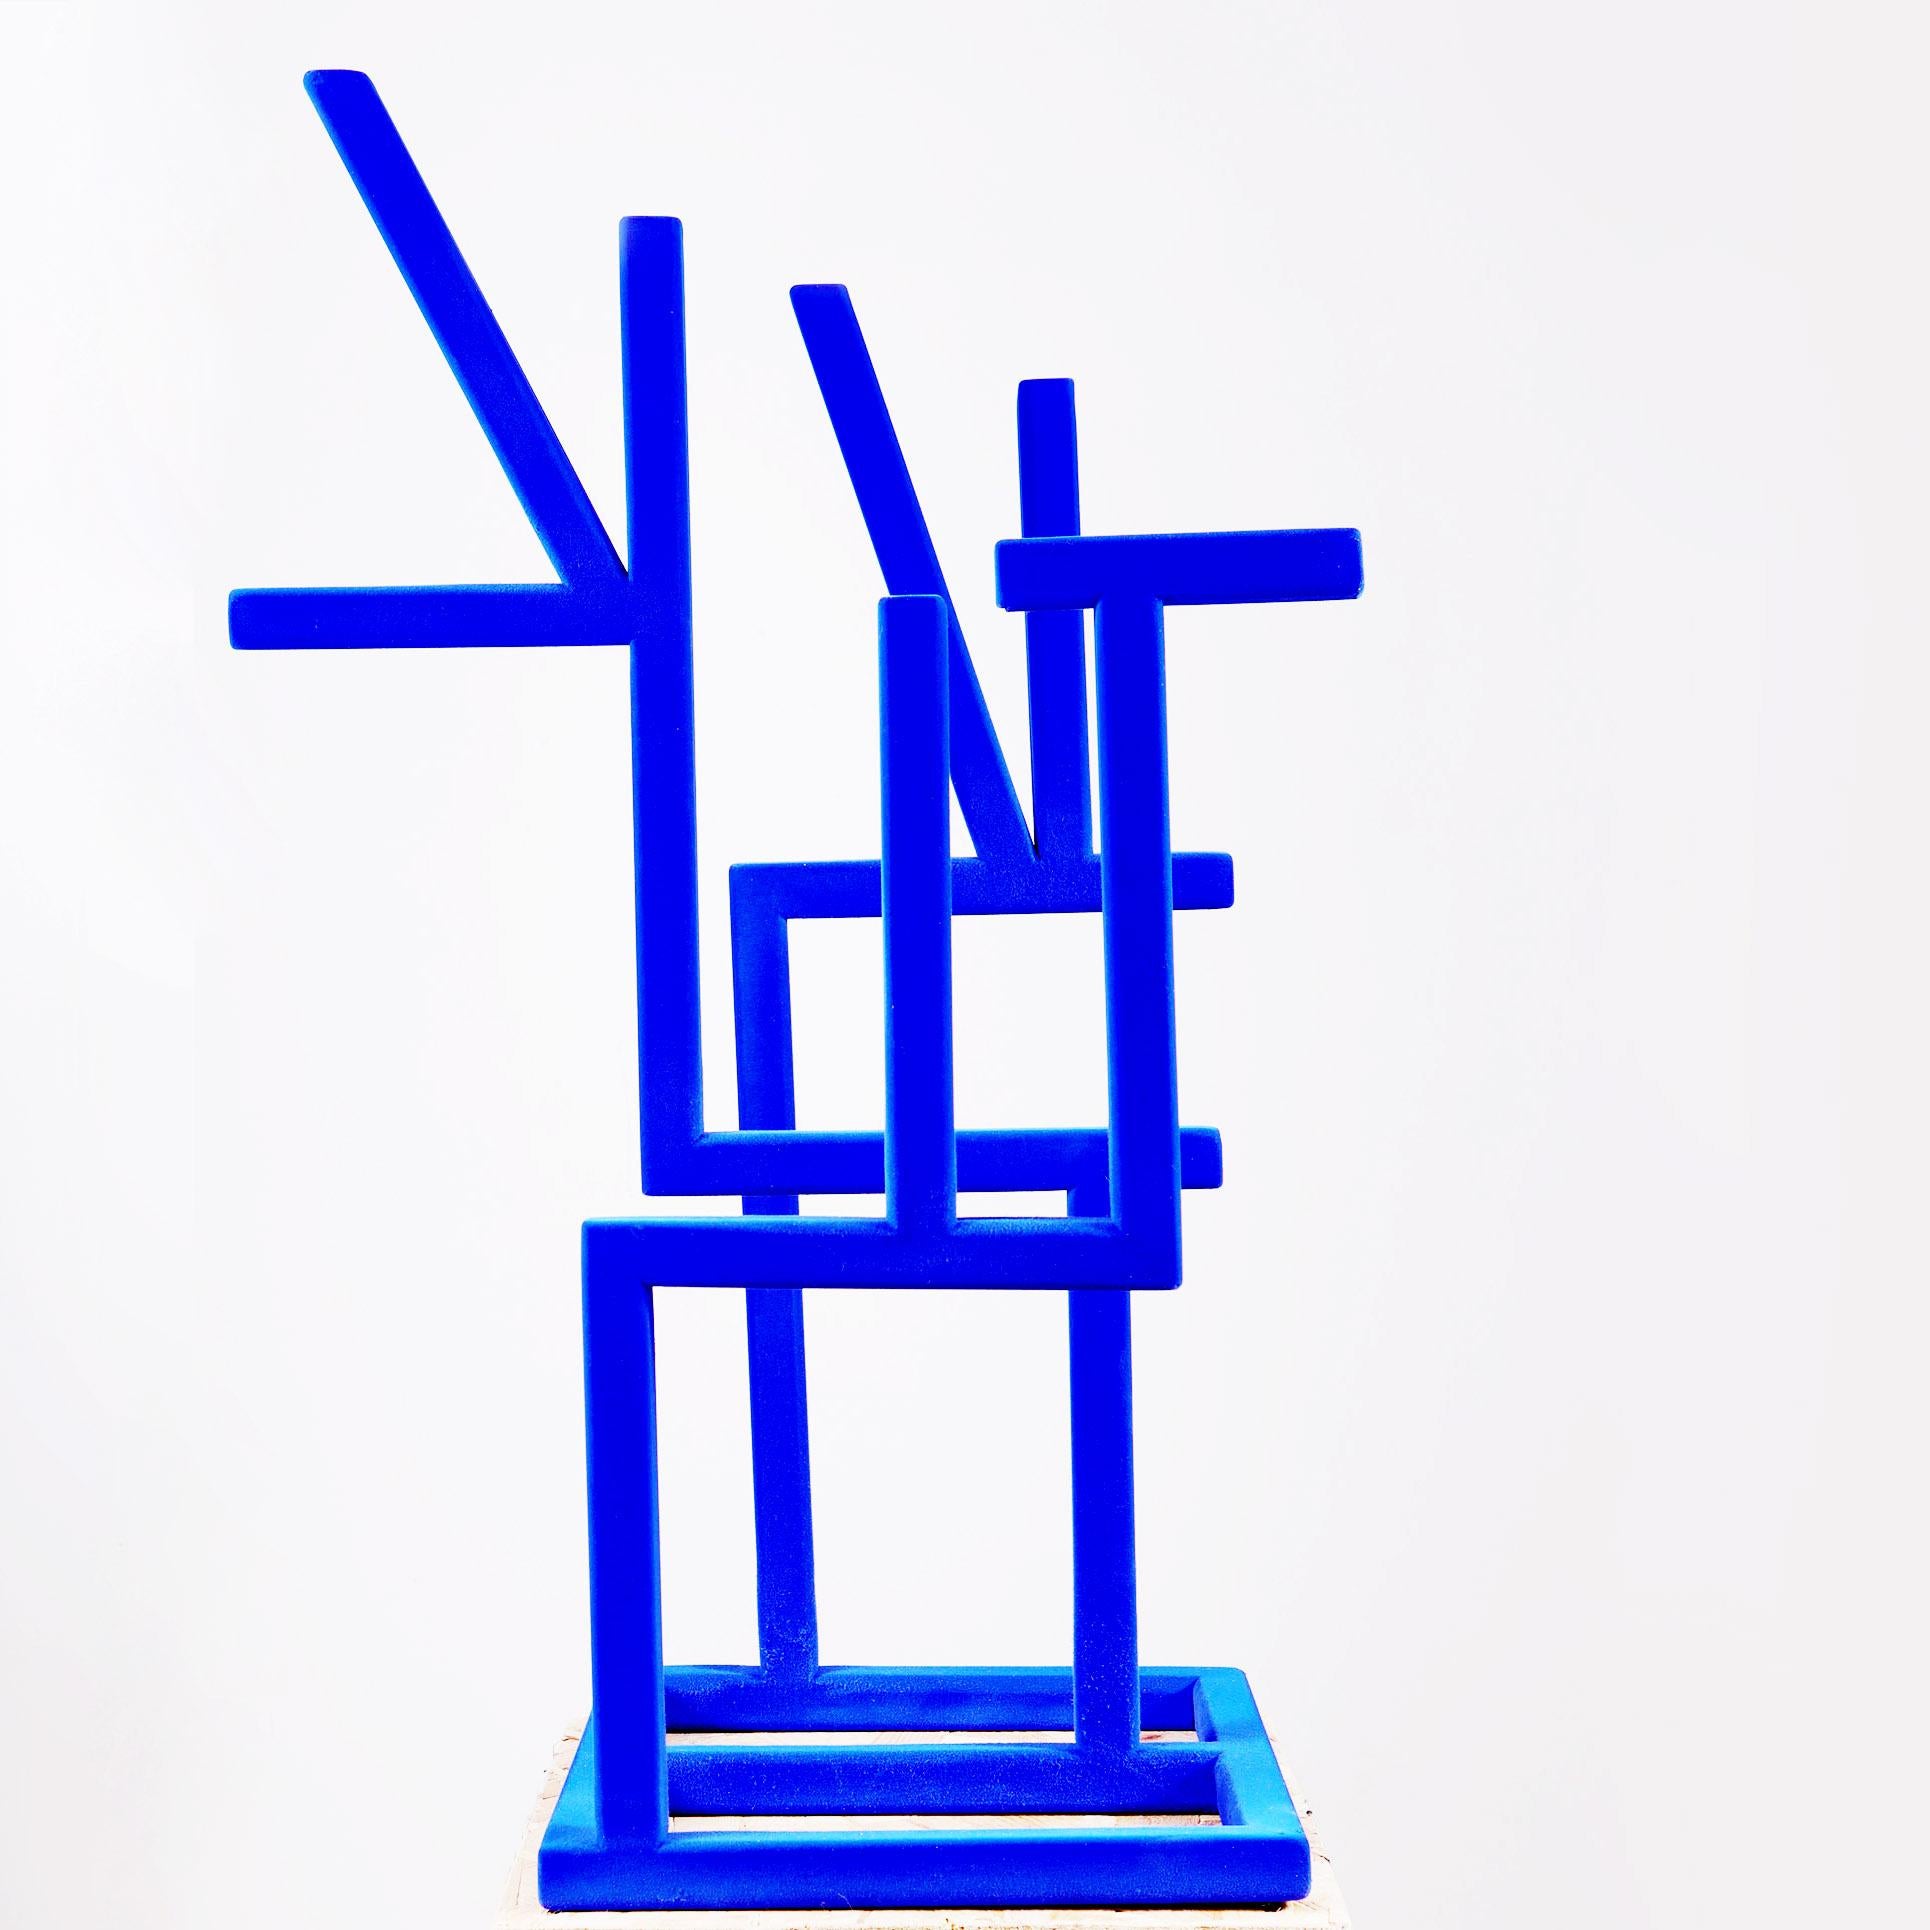 Dance The Blues I & II - Mark Houghton - Flocked Steel  In New Condition For Sale In London, by appointment only